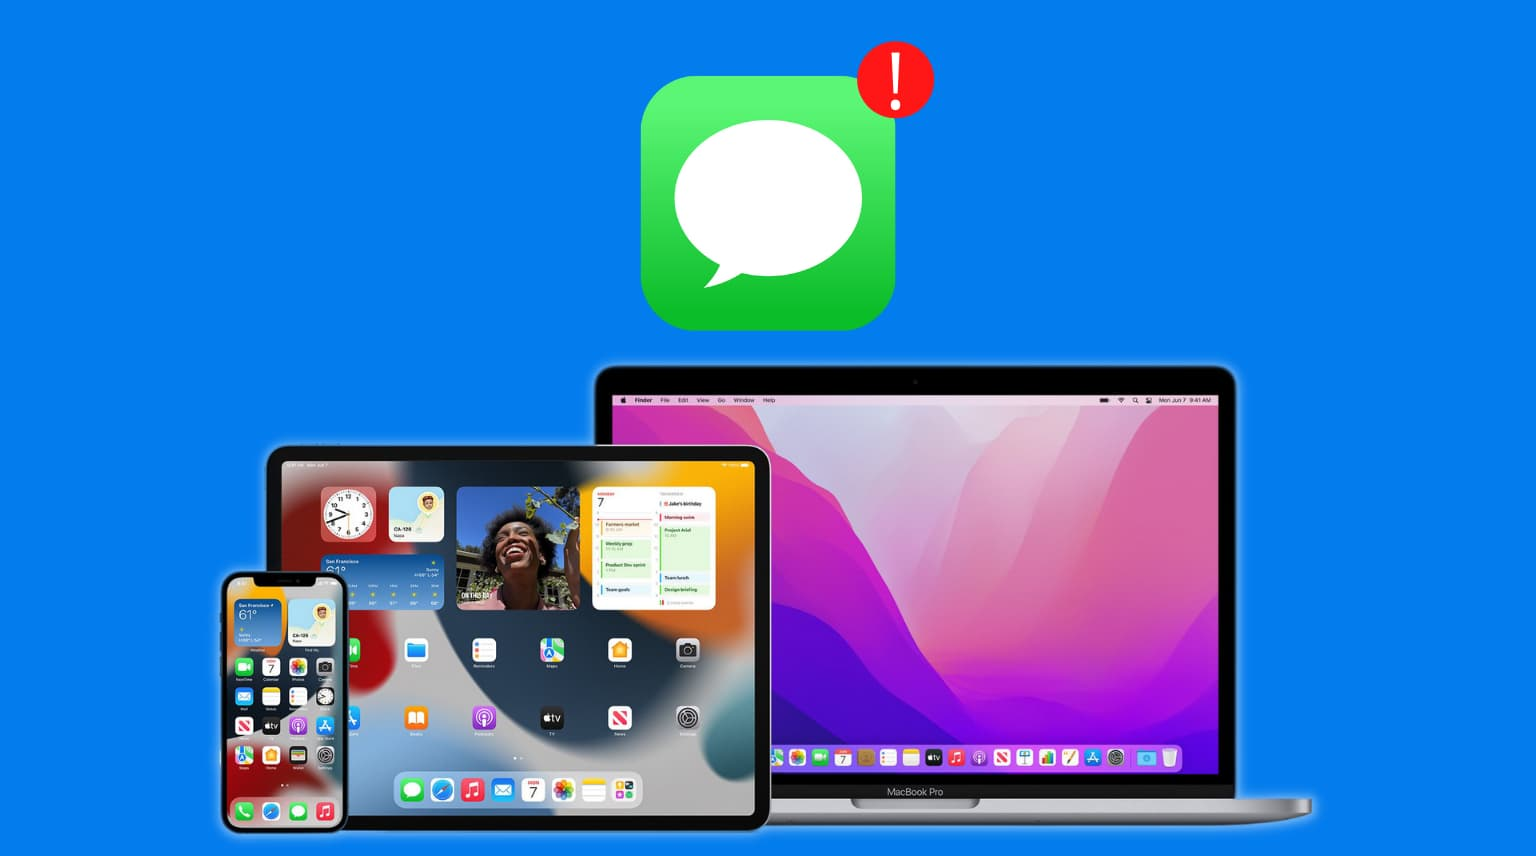 SECTION 3: Why isn't my iMessage Syncing across all my devices?